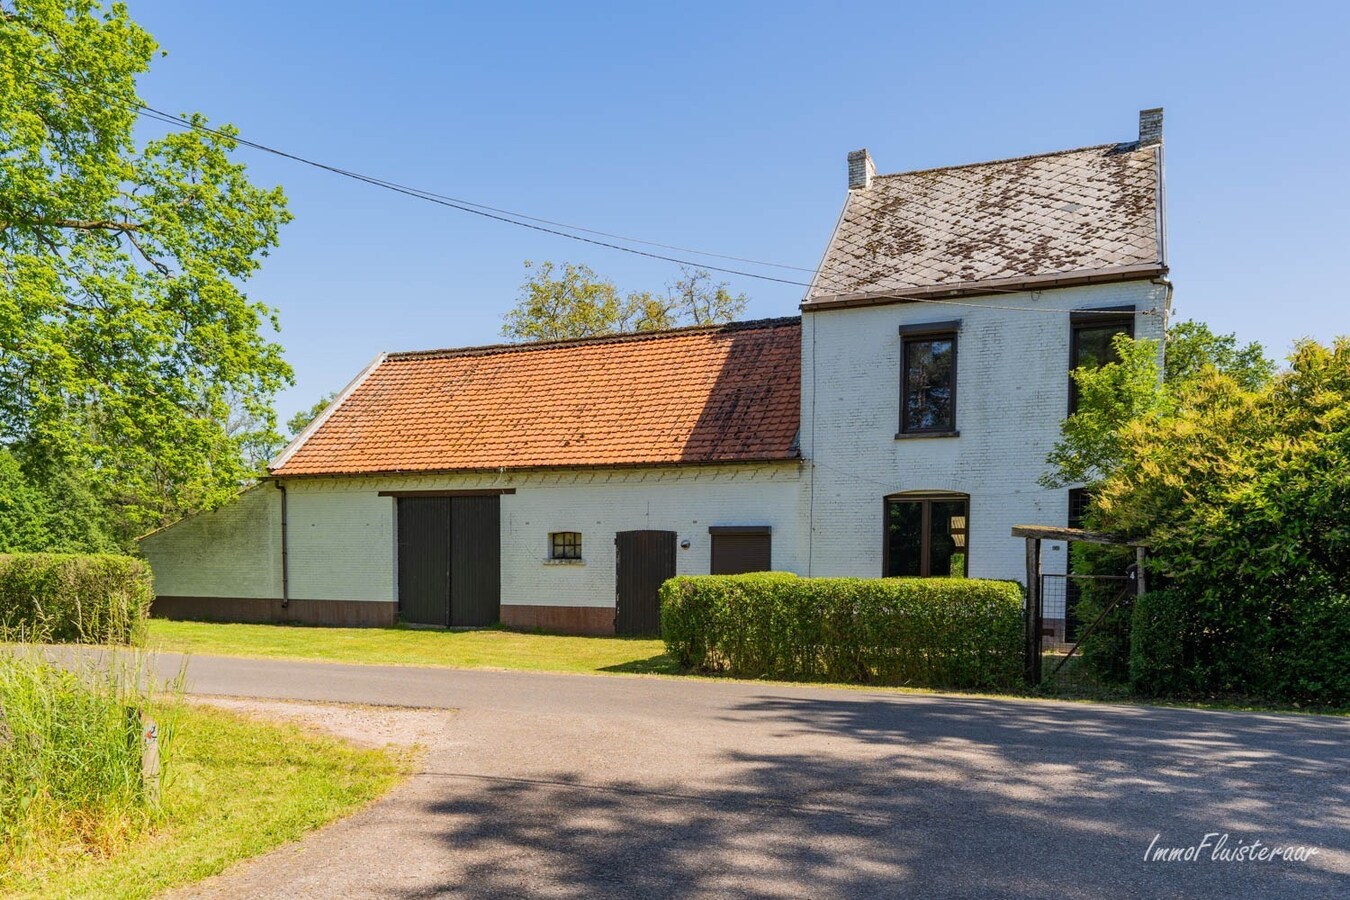 Property sold in Ham